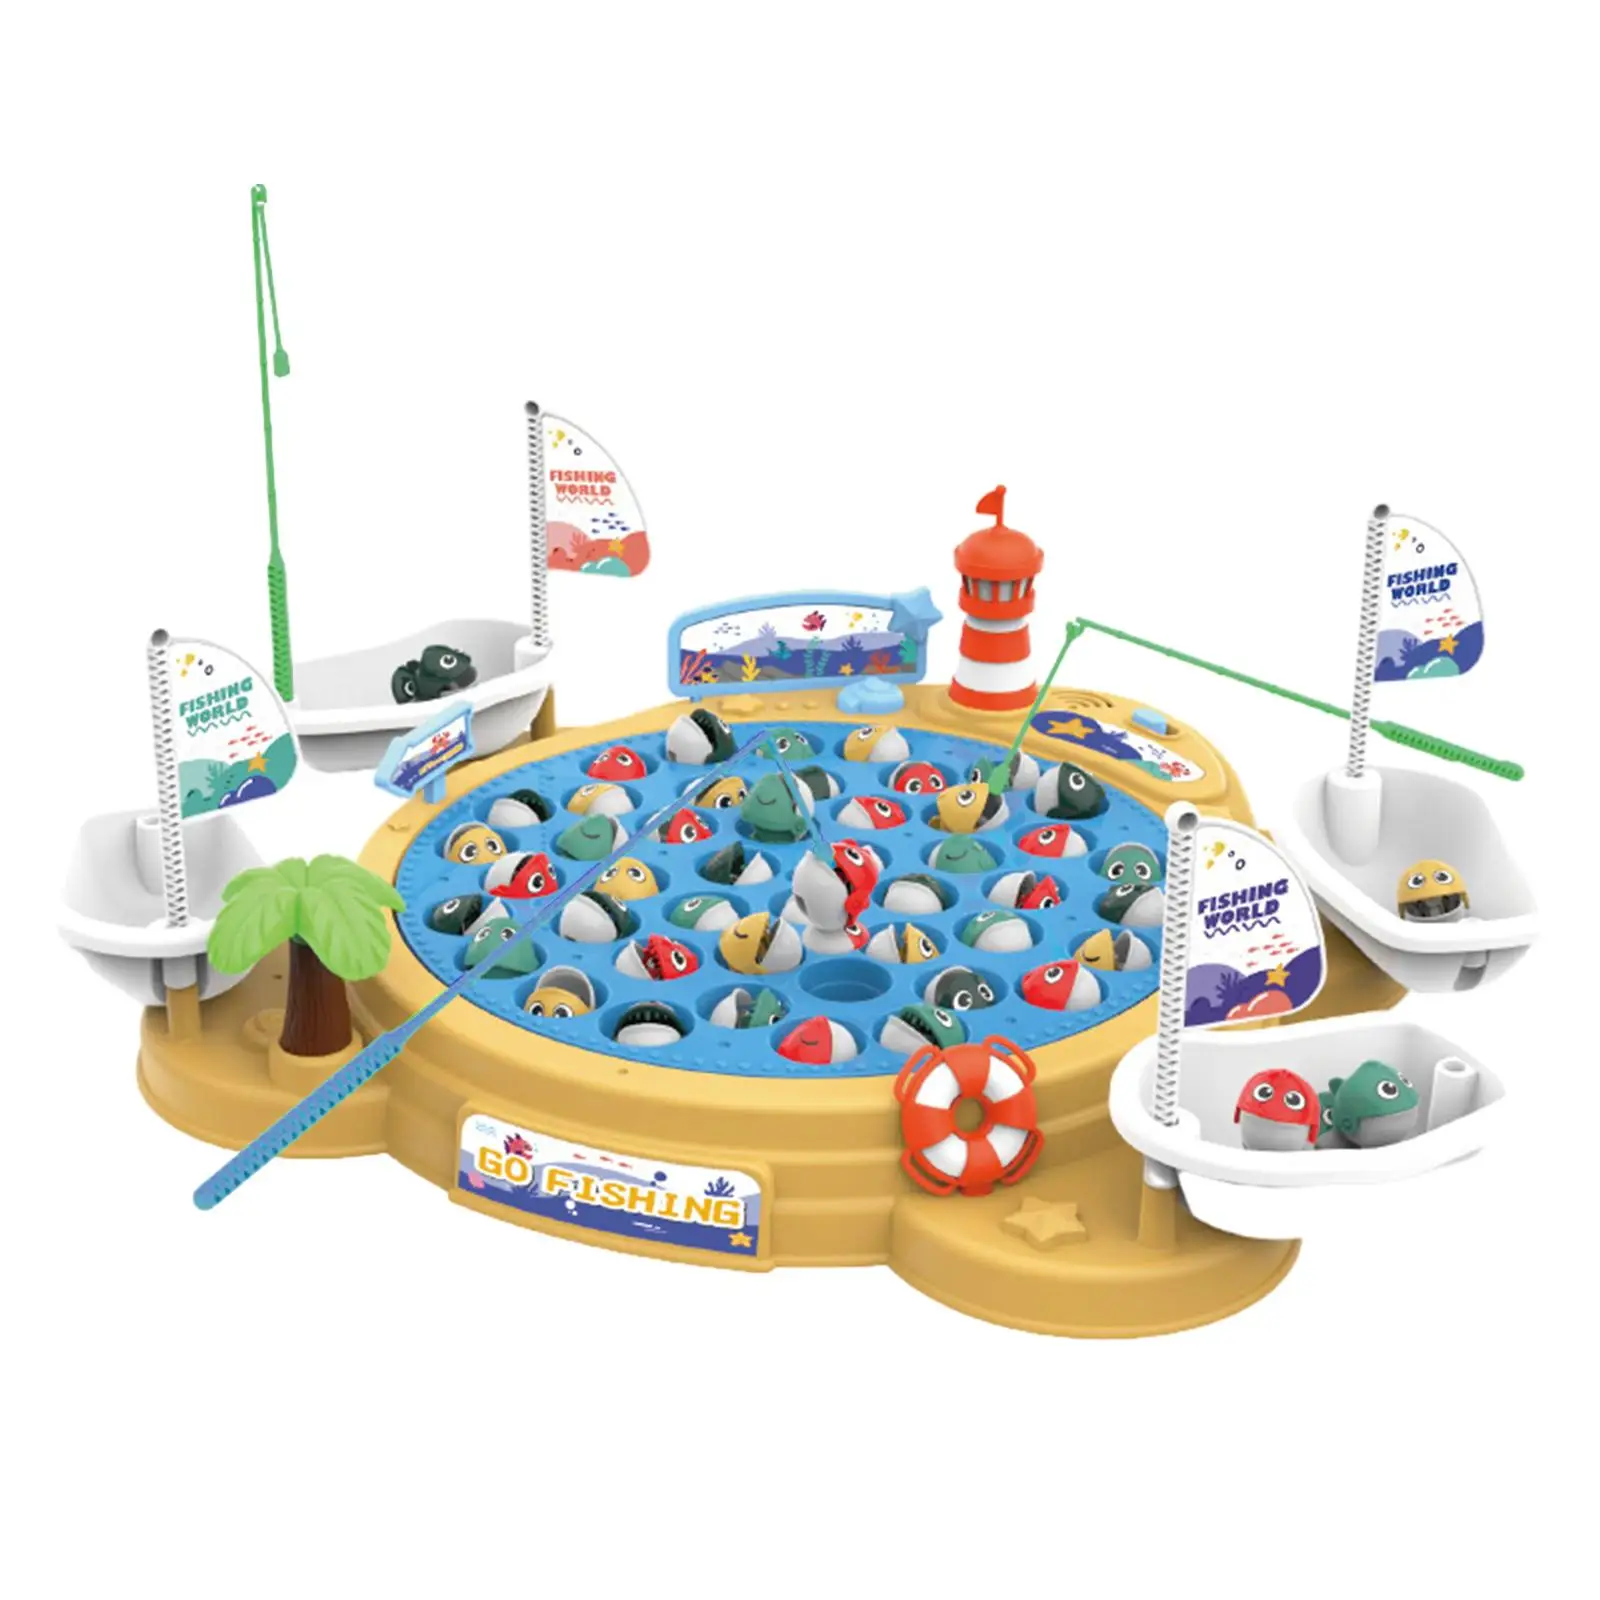 Fishing Game Play Set Novelty Preschool Learning Educational Toy Fishing Game Toy for Girls Children Toddlers Holiday Gifts